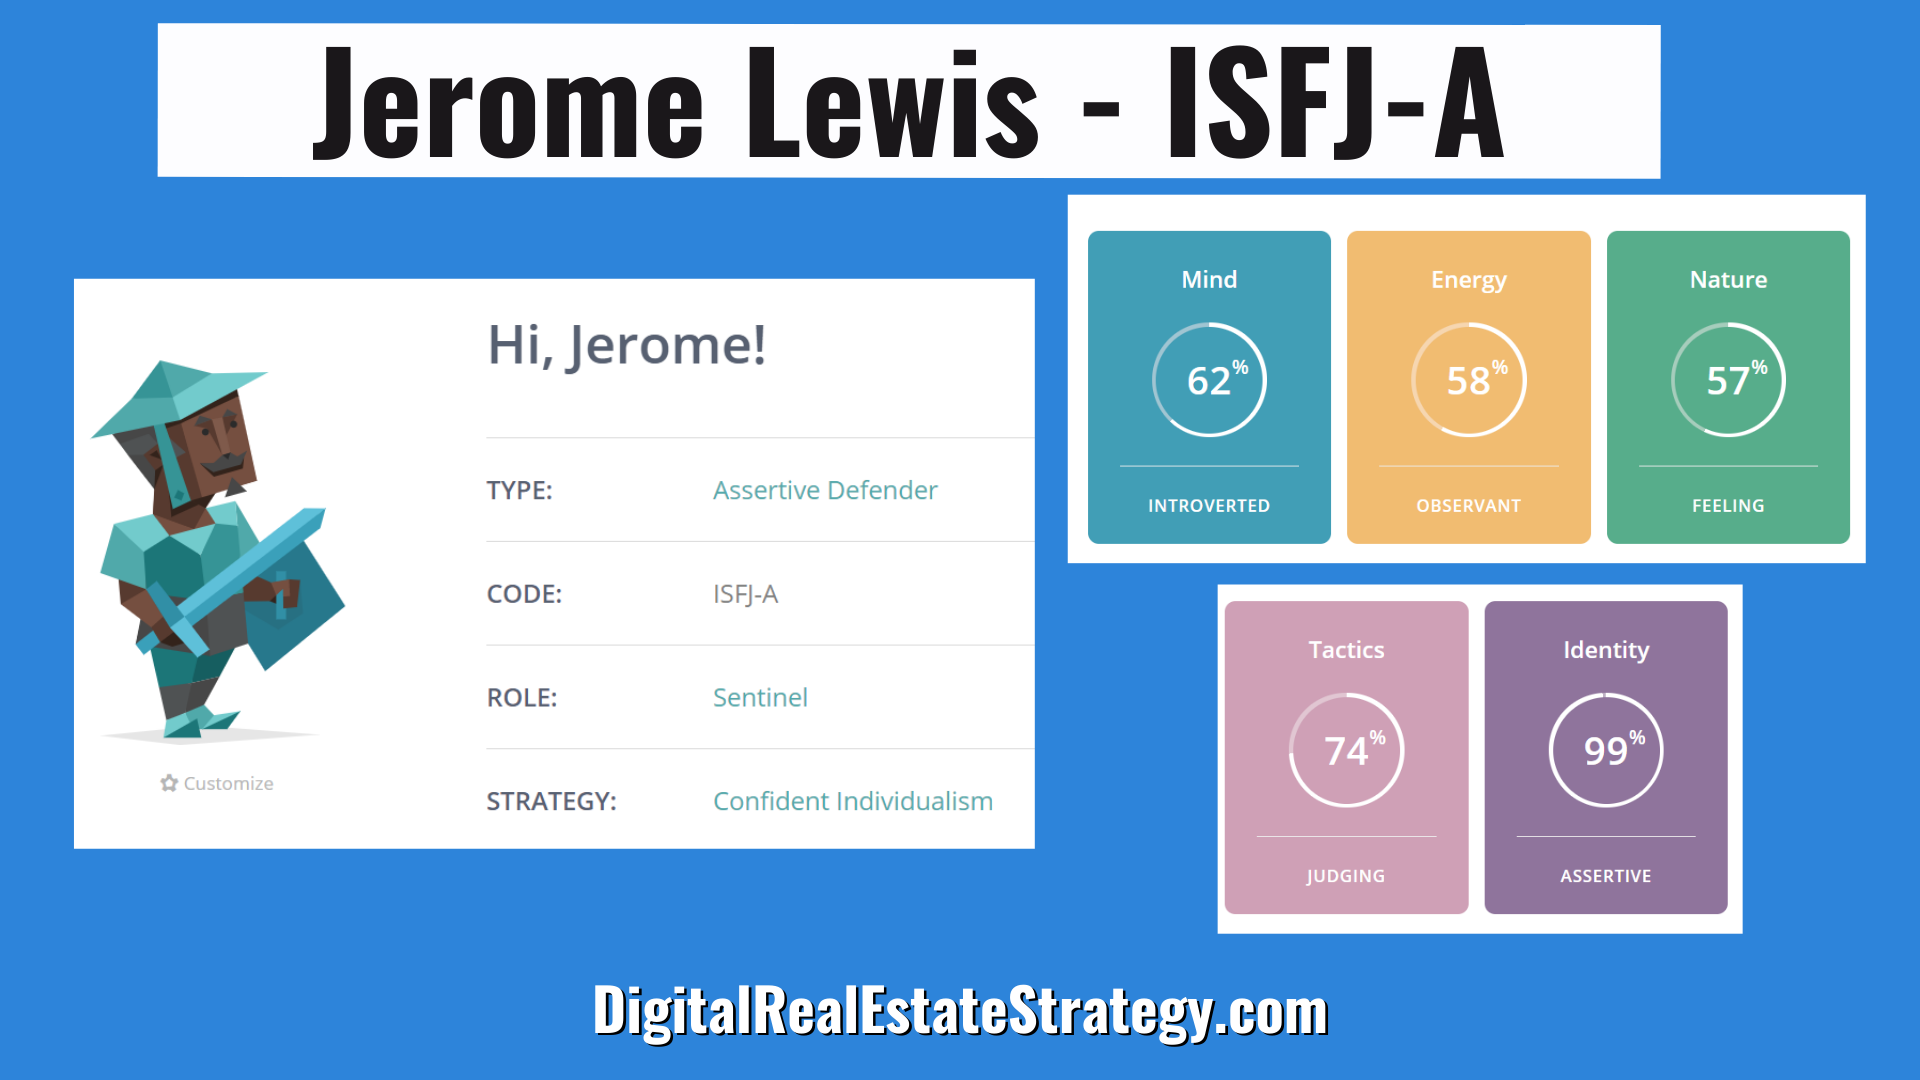 Jerome Lewis Personality Type - ISFJ, Assertive Defender